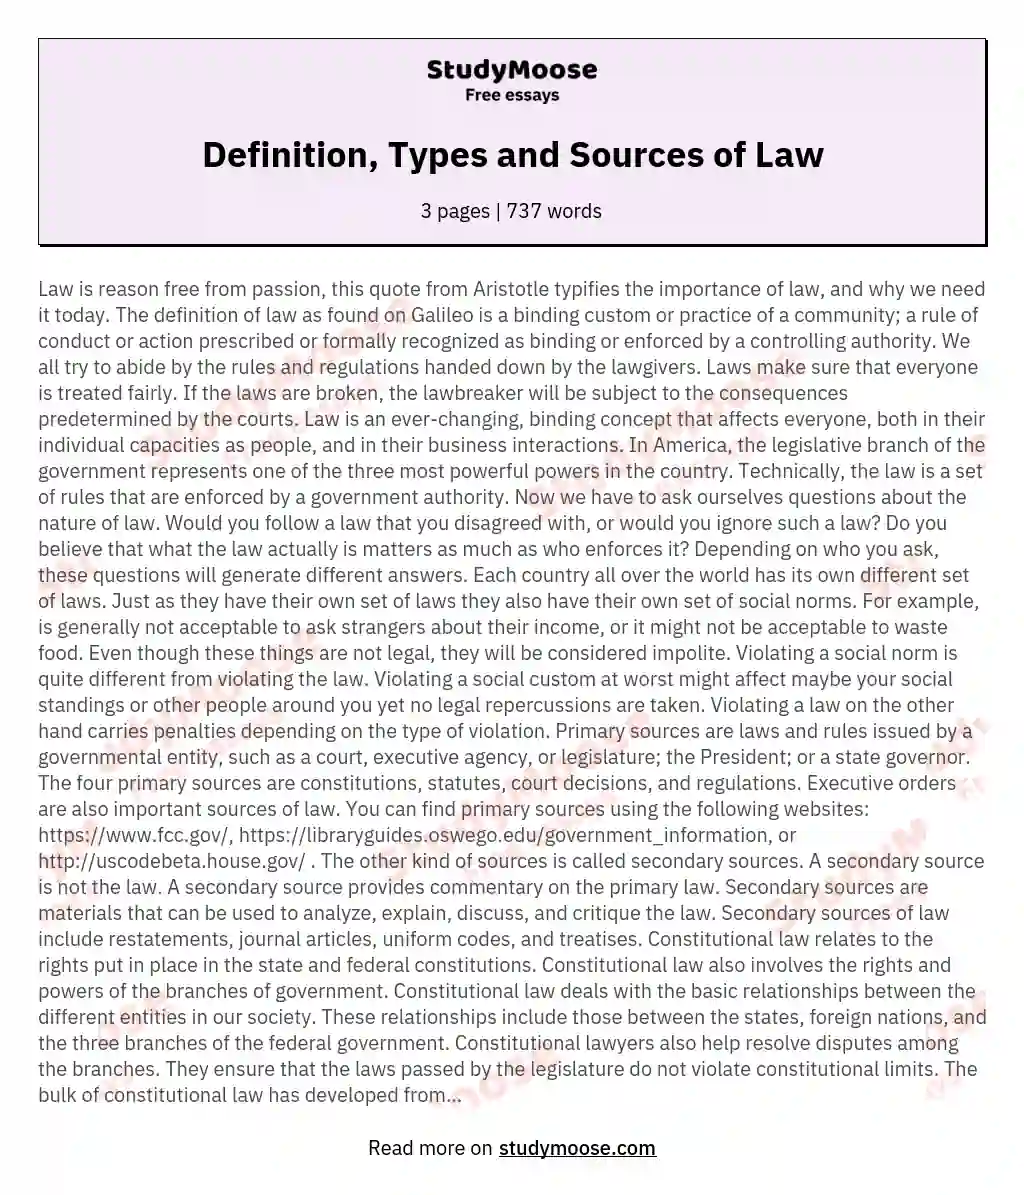 Definition, Types and Sources of Law essay